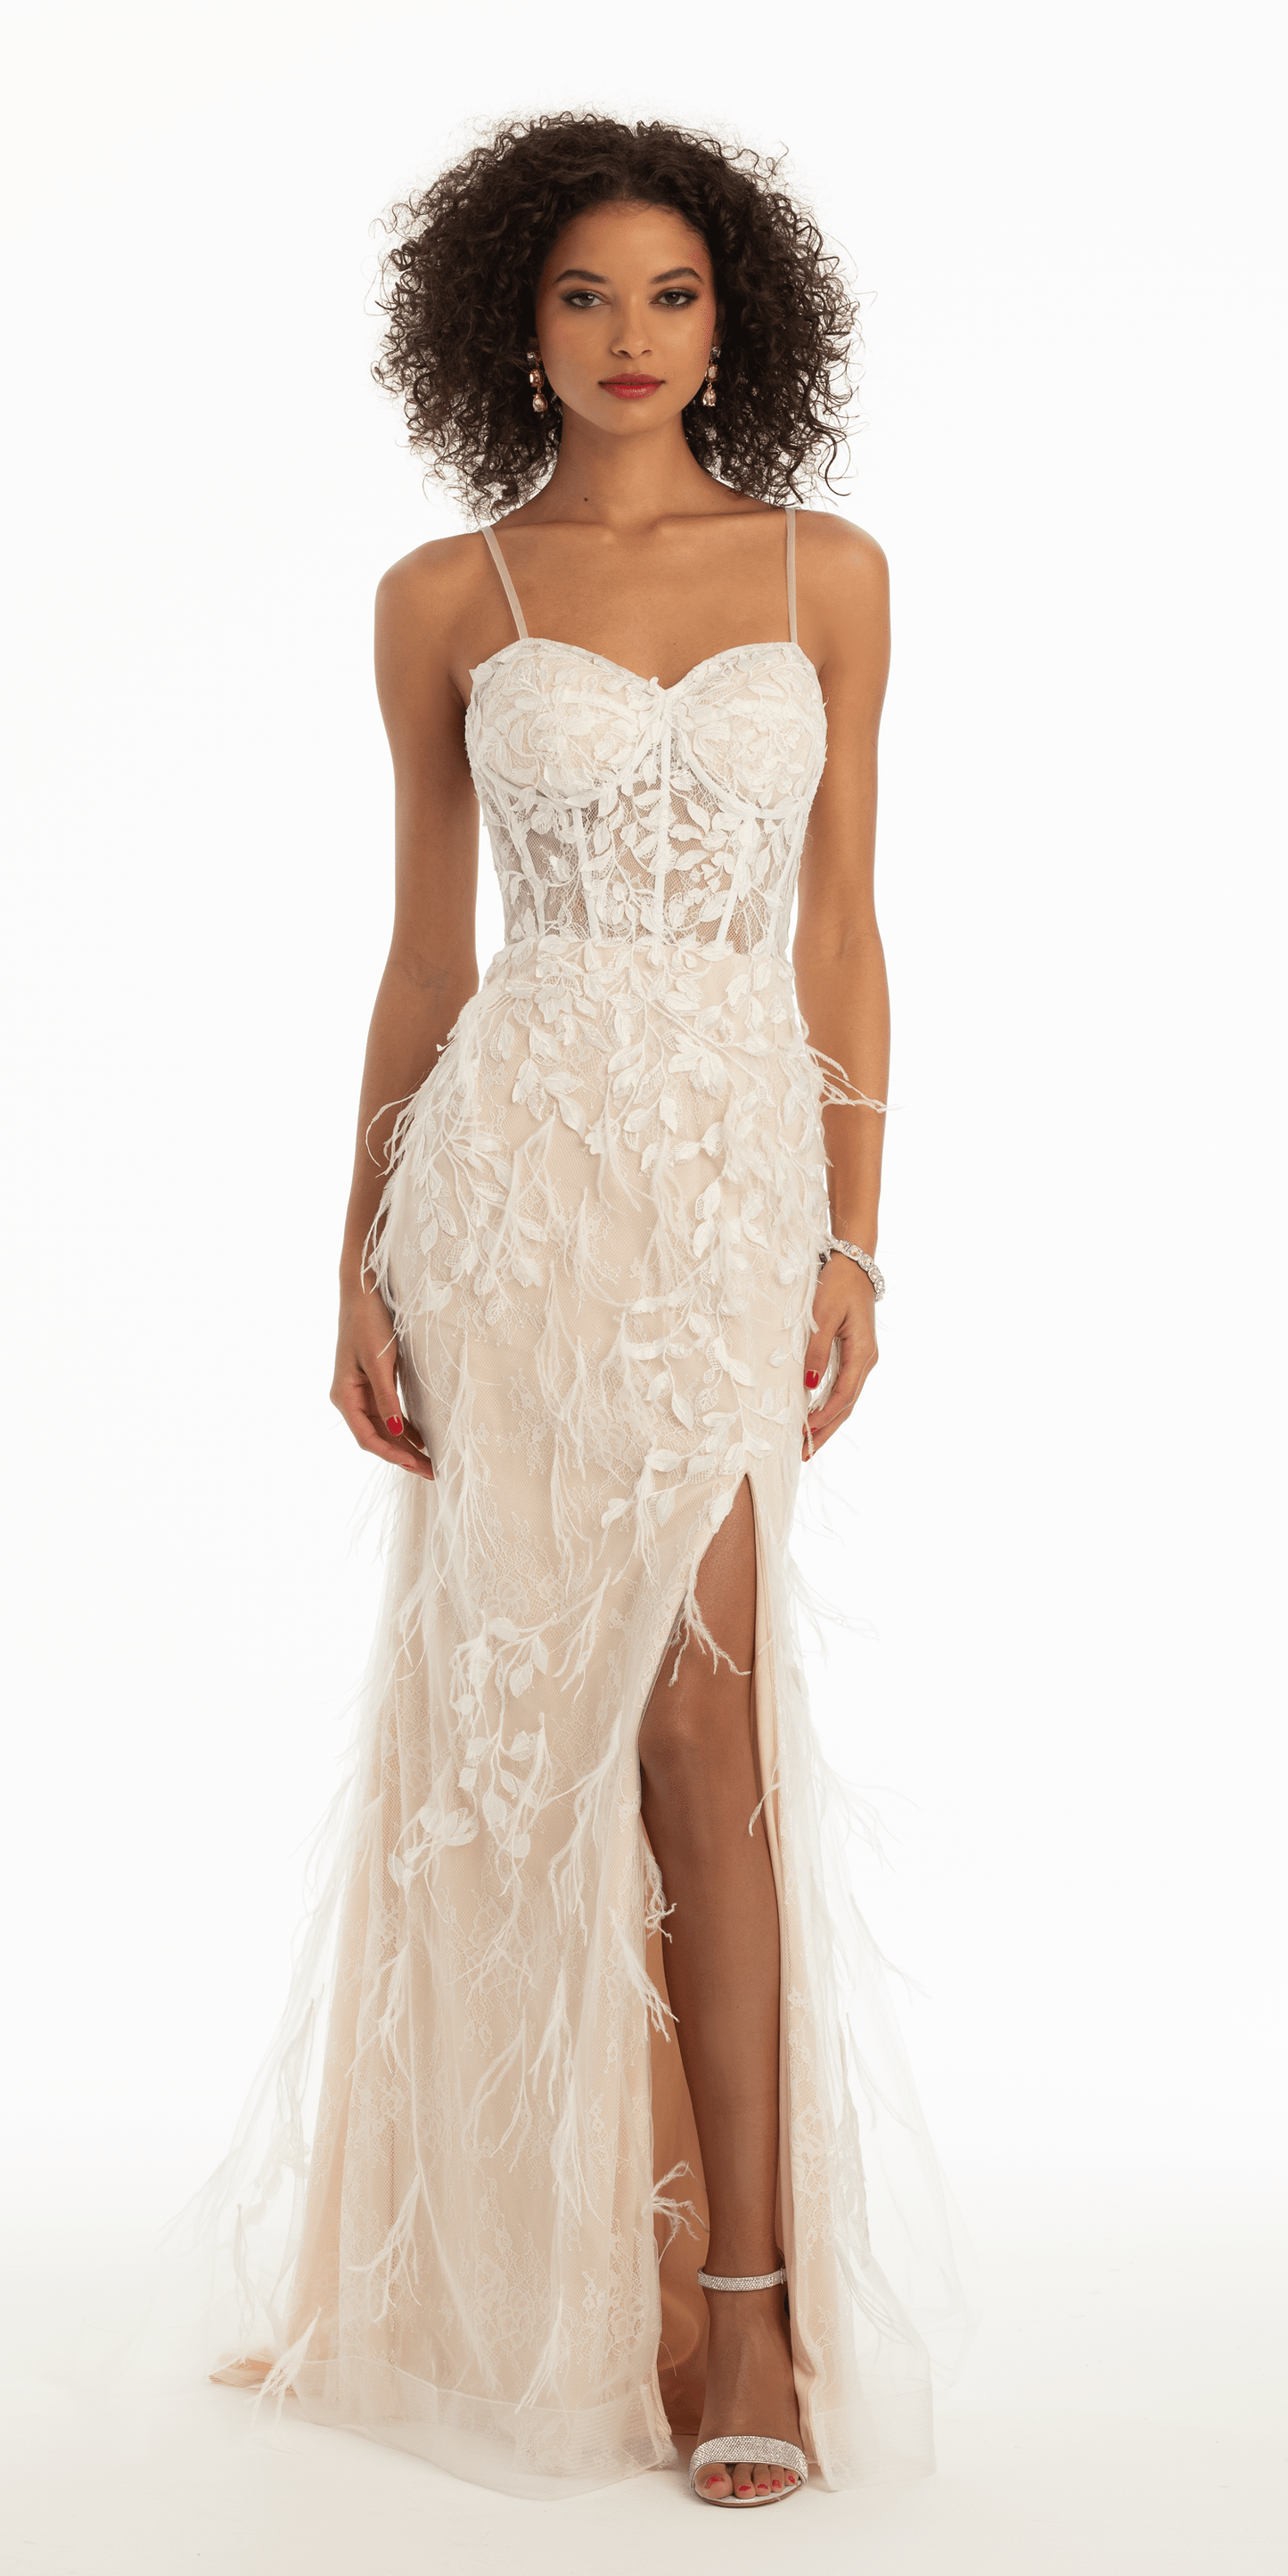 Camille La Vie Embroidered Sweetheart Corset Mesh Column Dress with Feathers missy / 0 / ivory-nude